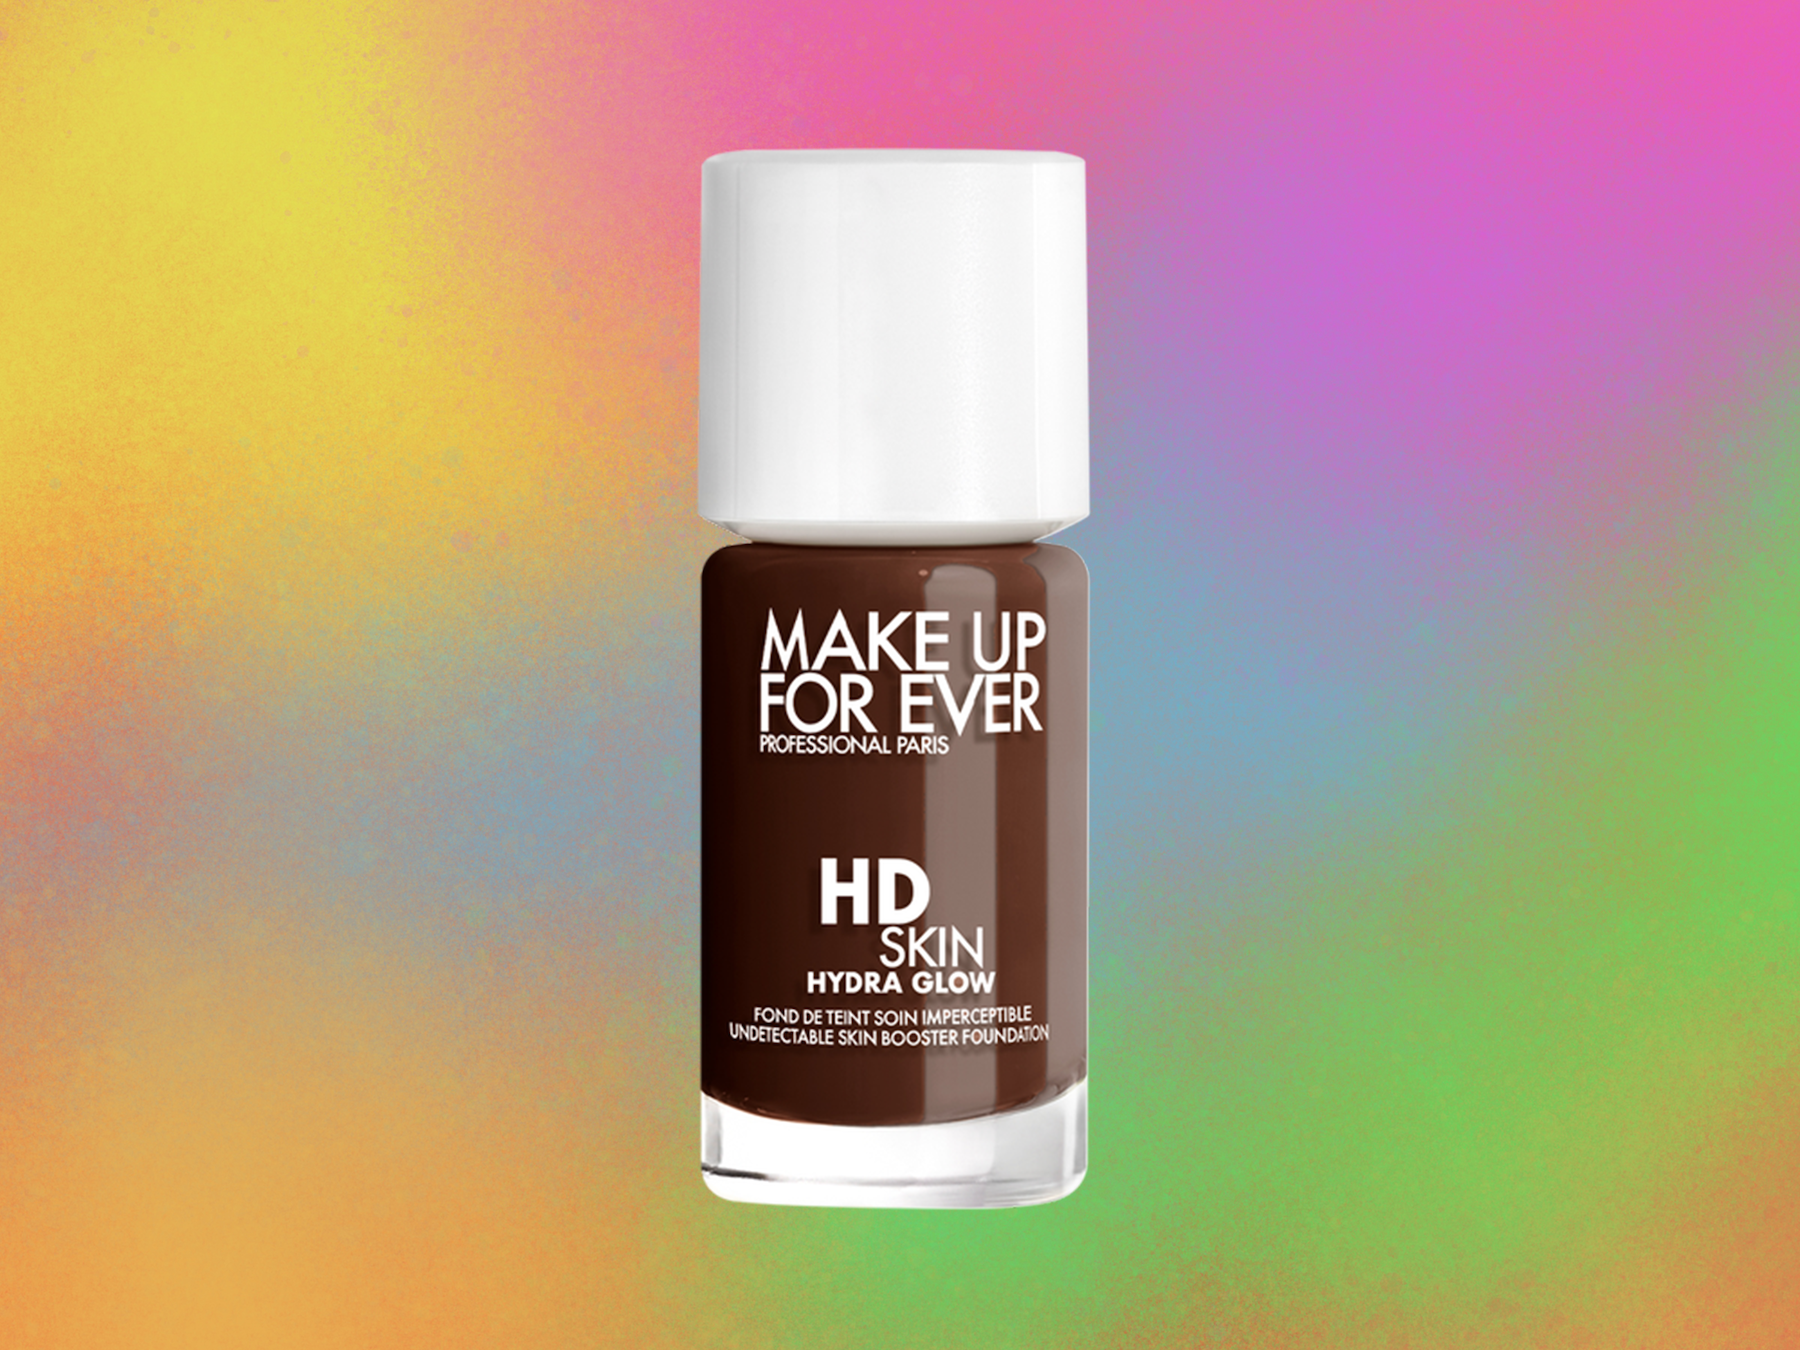 Product of the Week: Make Up For Ever HD Hydra Glow Foundation